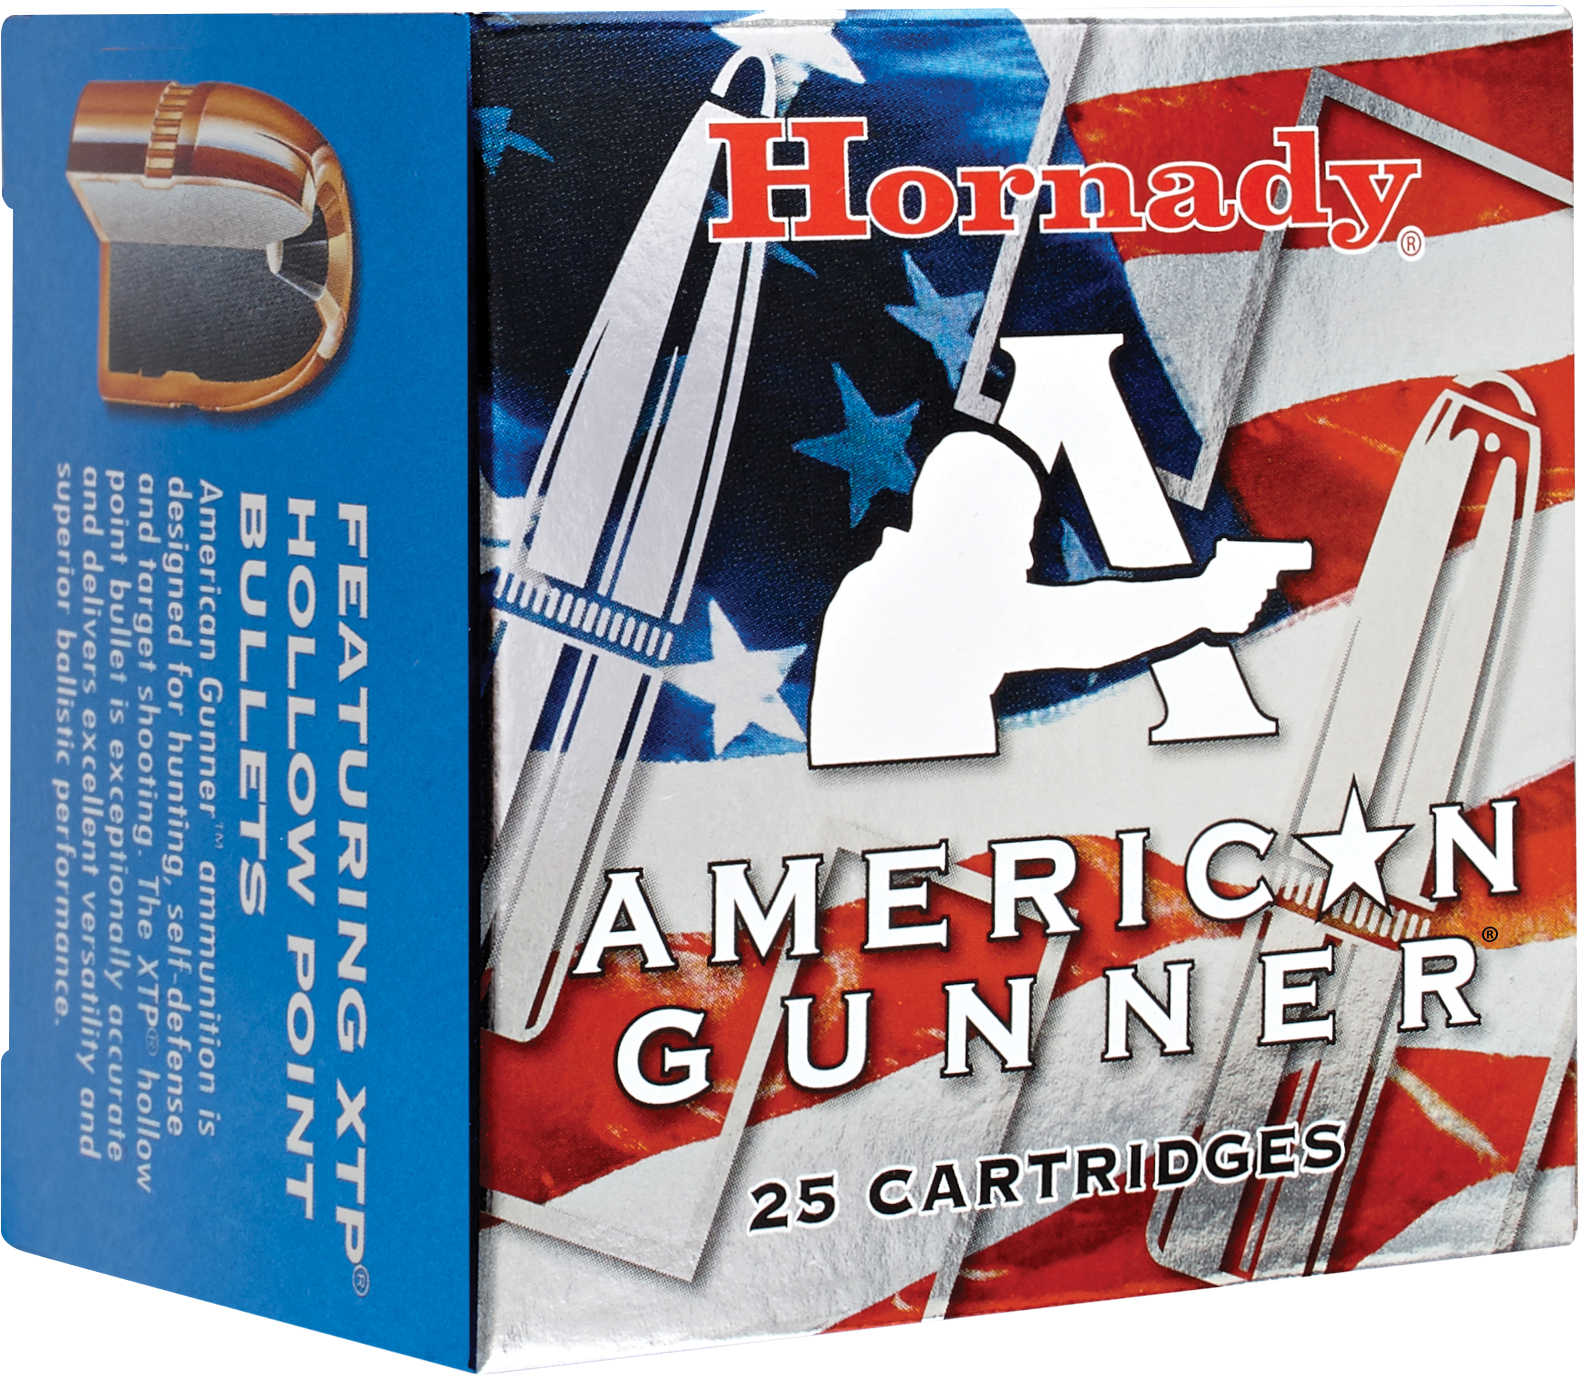 9mm Luger 25 Rounds Ammunition Hornady 124 Grain Jacketed Hollow Point